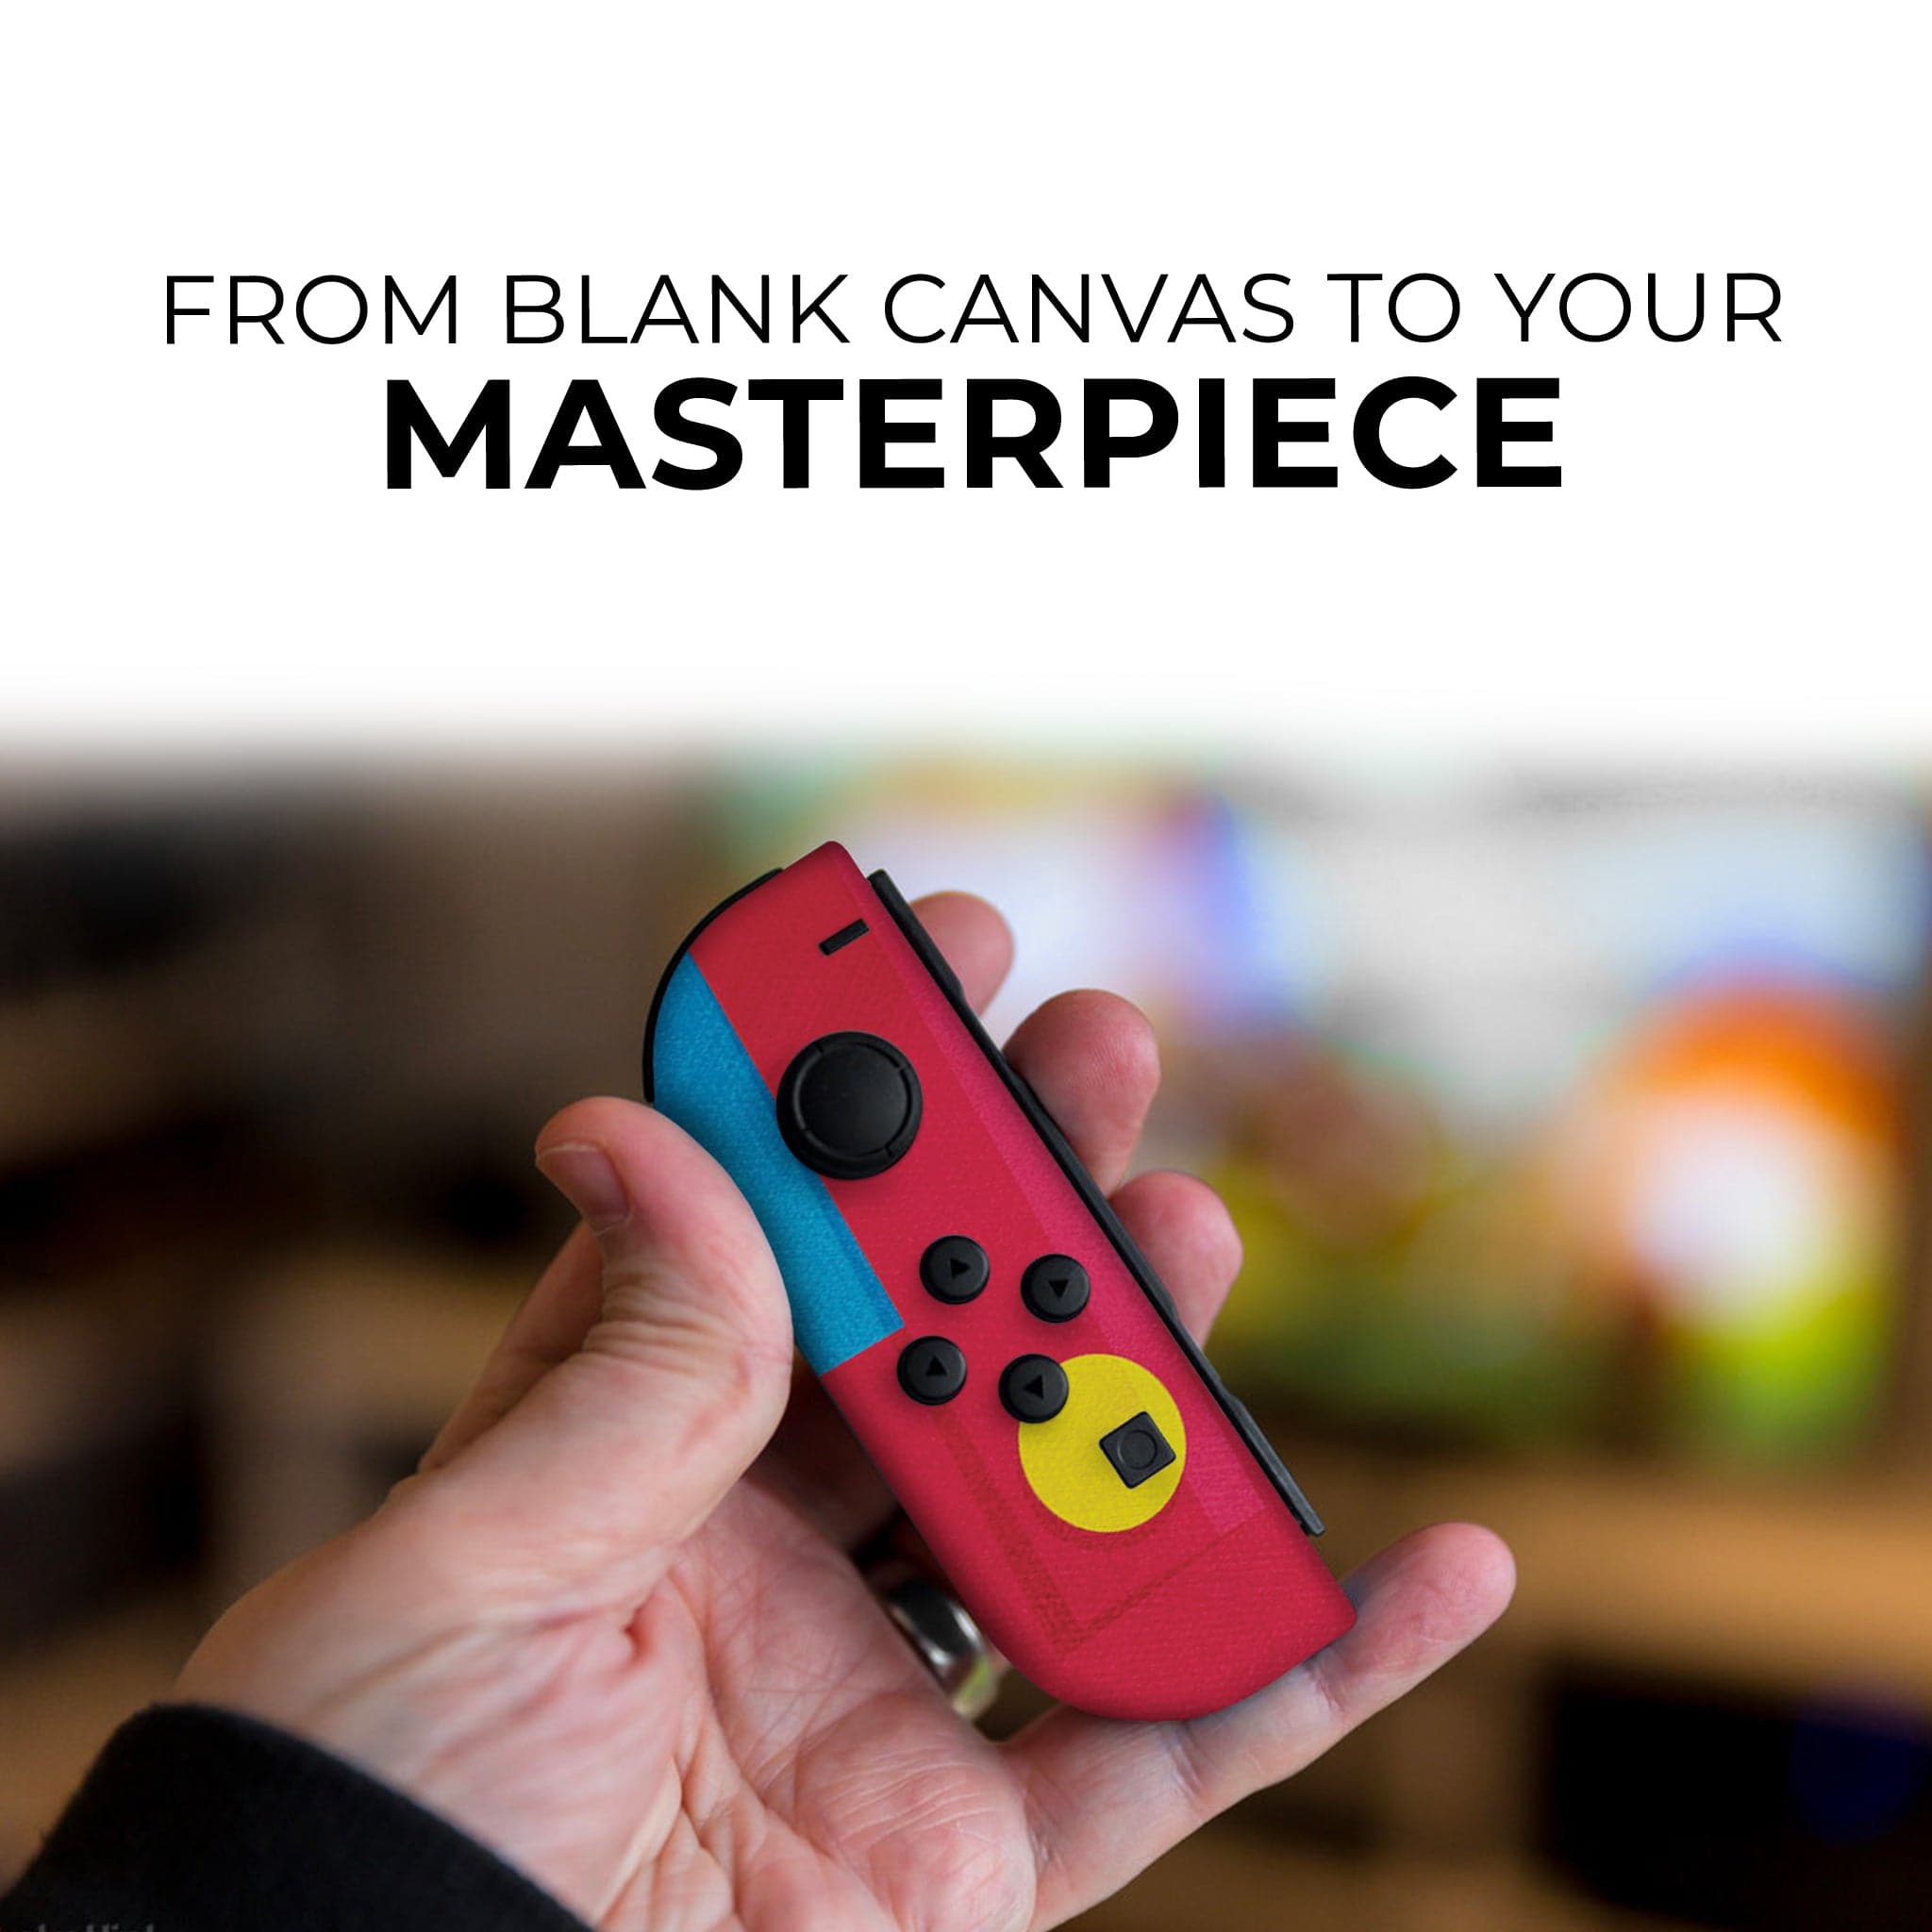 Super Mario Bros Inspired Nintendo Switch Joy-Con Left and Right Switch Controllers by Nintendo